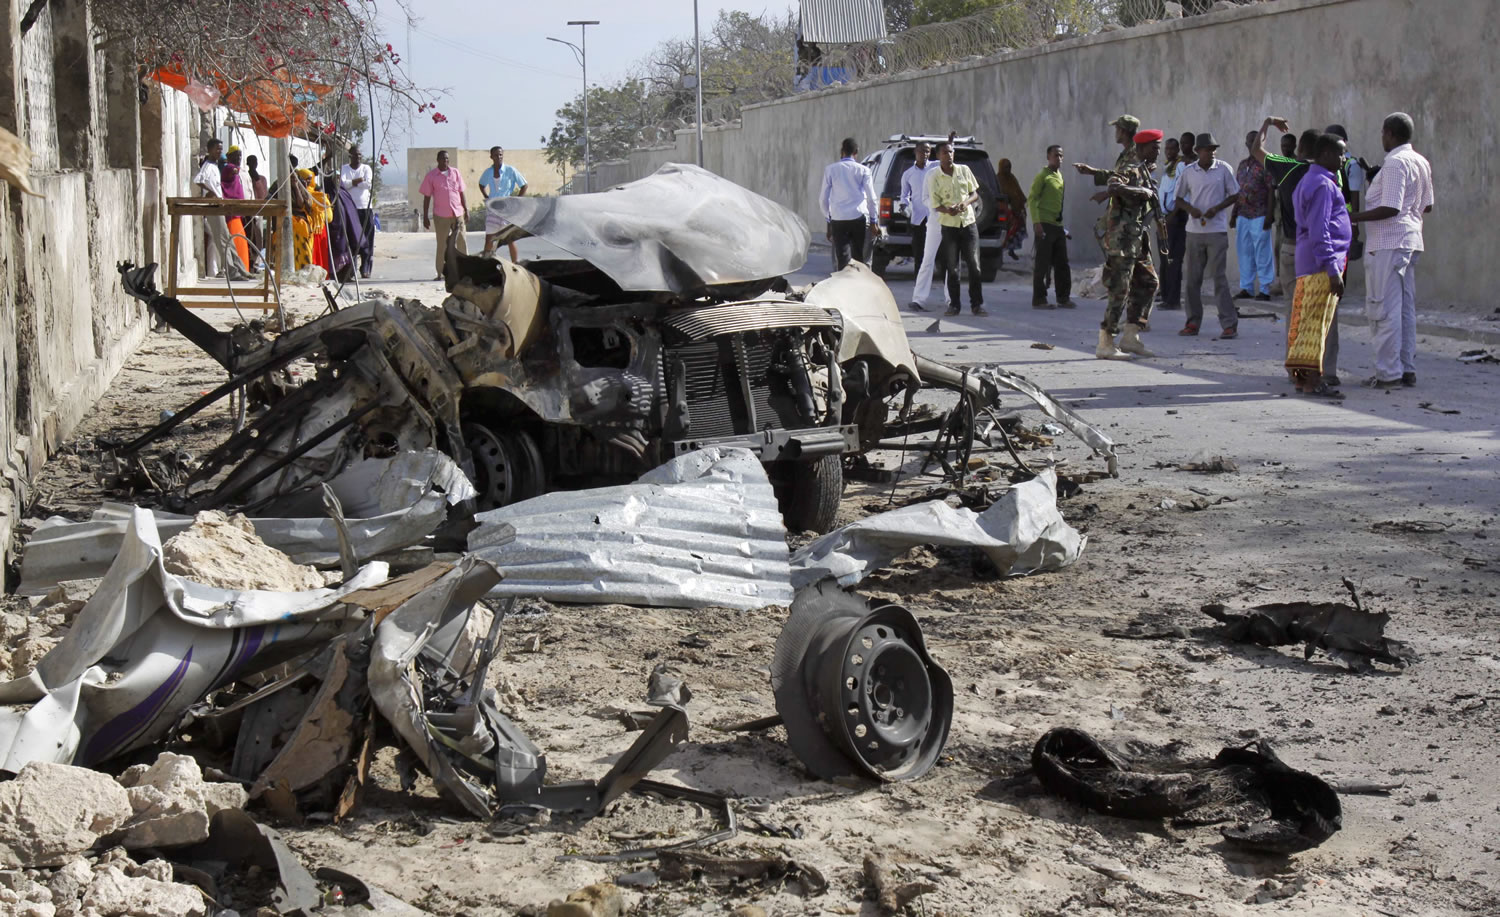 Somalis gather near the wreckage of one of the vehicles used Friday for a car bombing attack on the presidential palace in Mogadishu, Somalia.